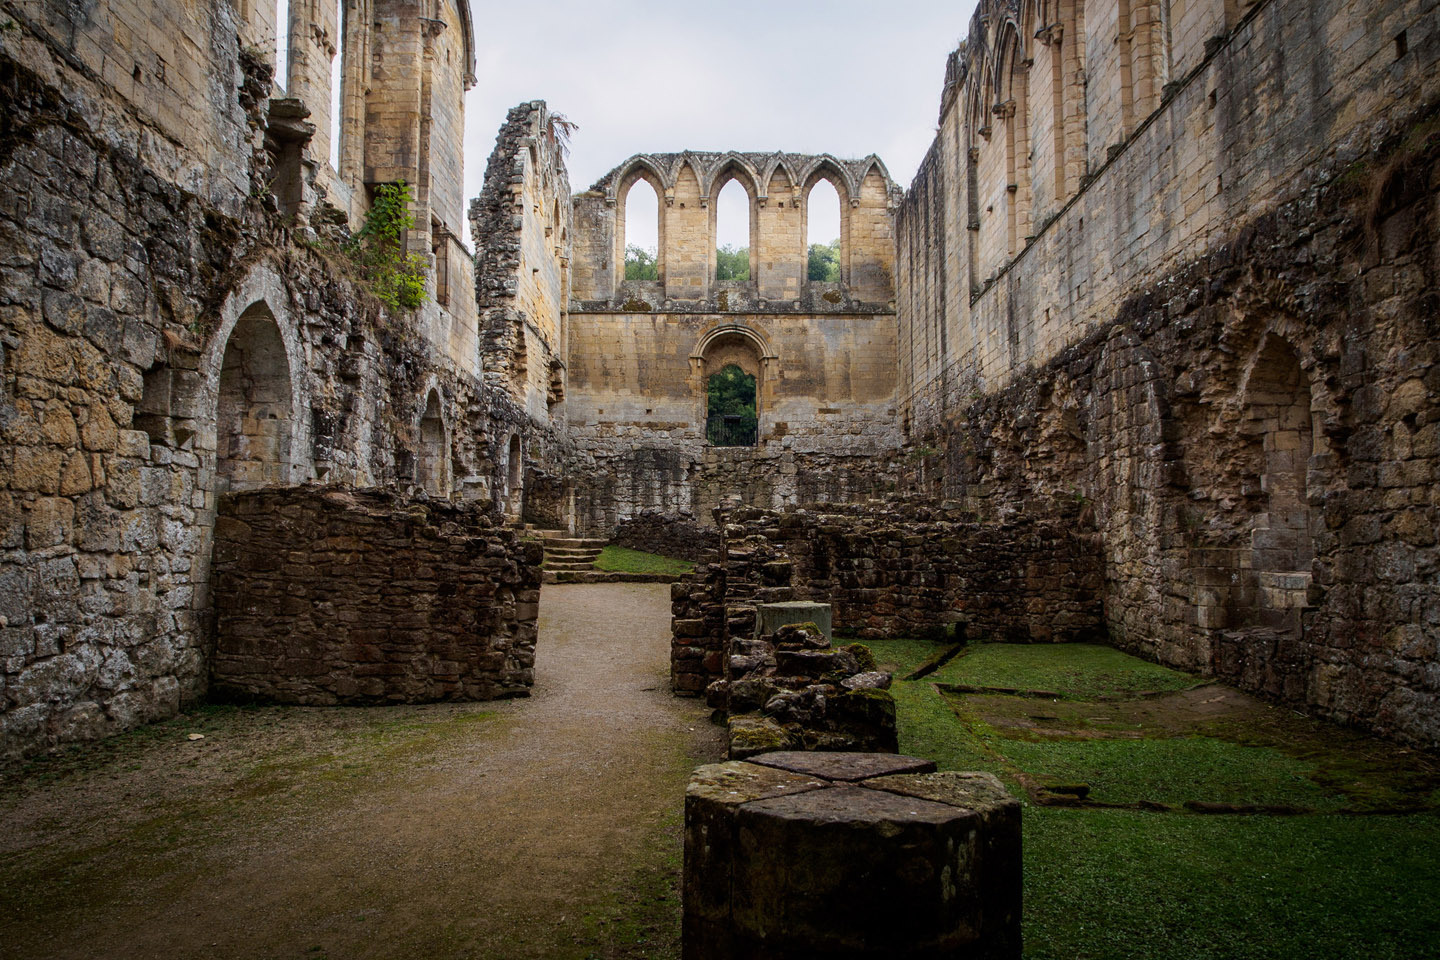 Today, a museum is housed in the abbey, led by English Heritage, a company/charity that is responsible for the preservation of more than 400 historic sites across England